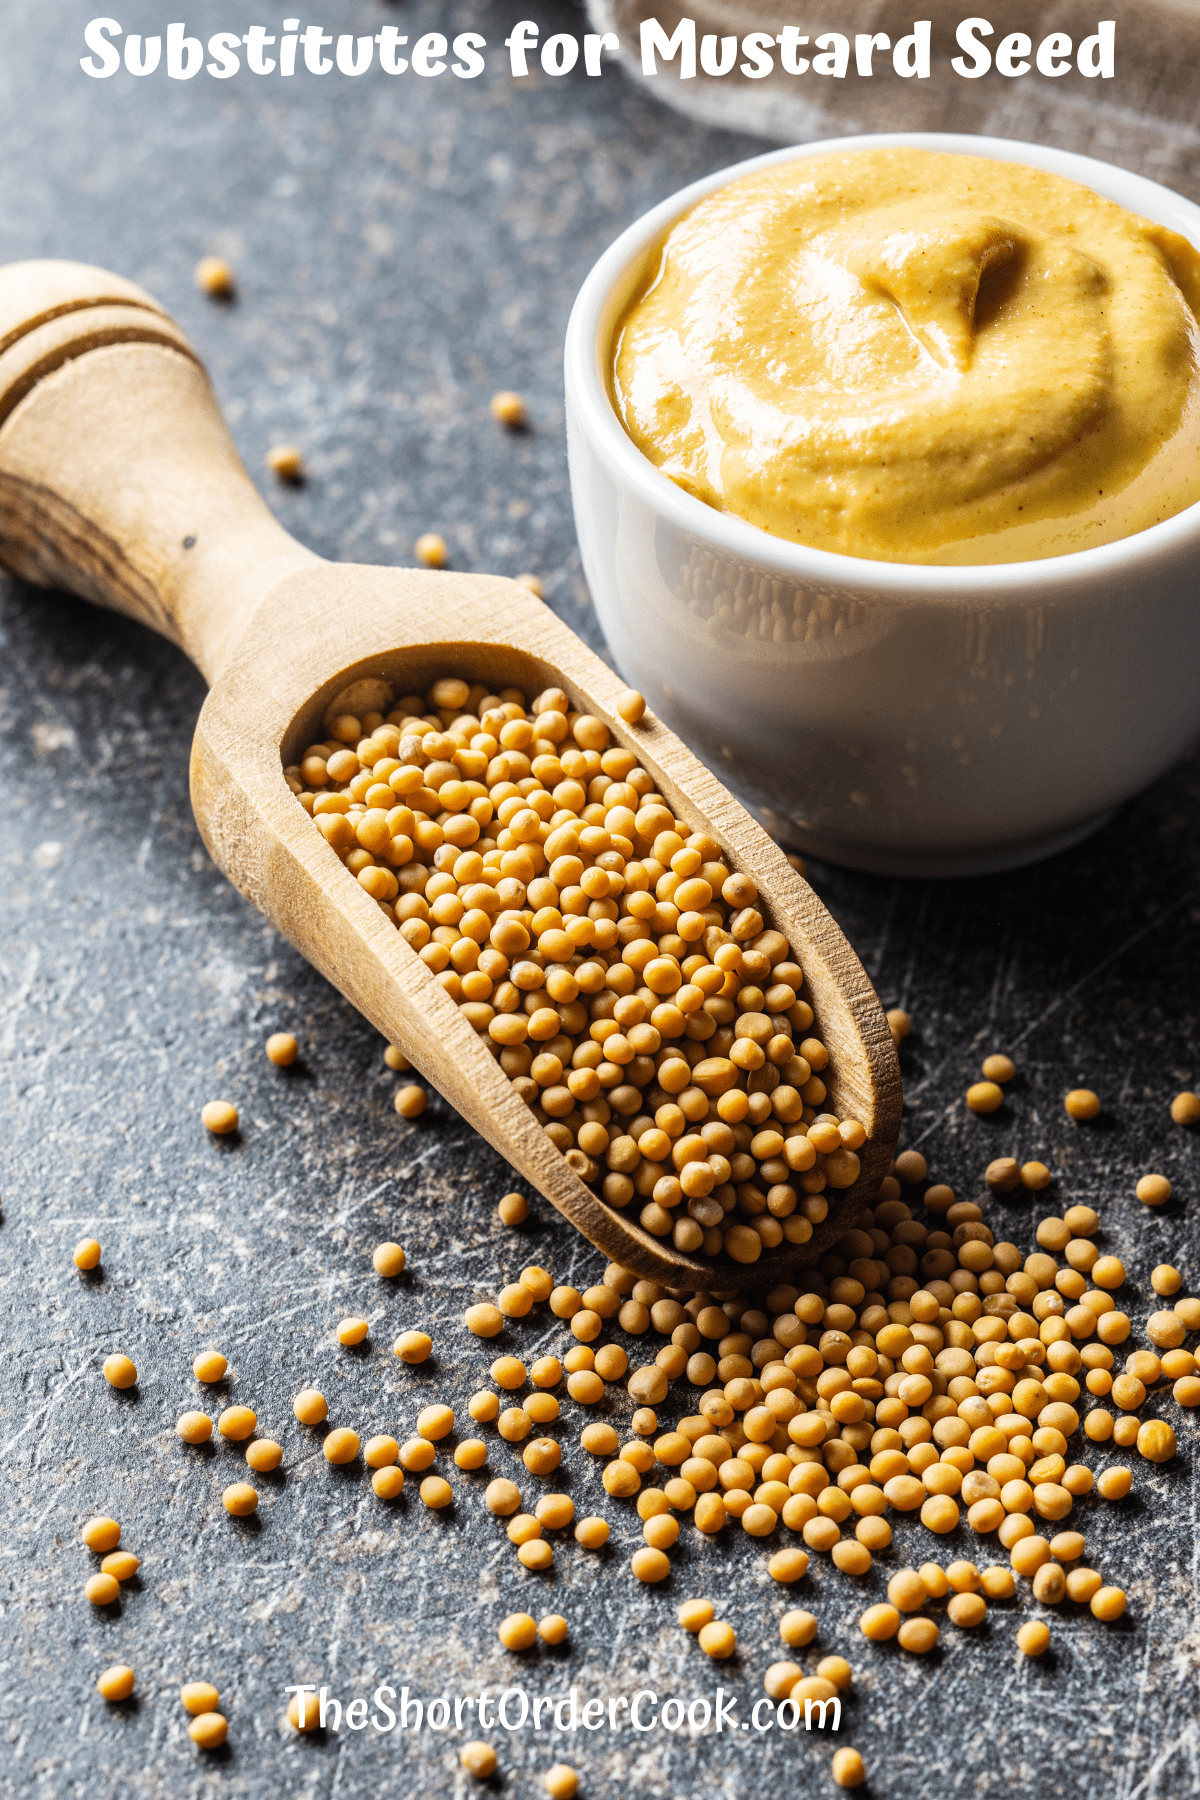 Substitutes for Mustard Seed